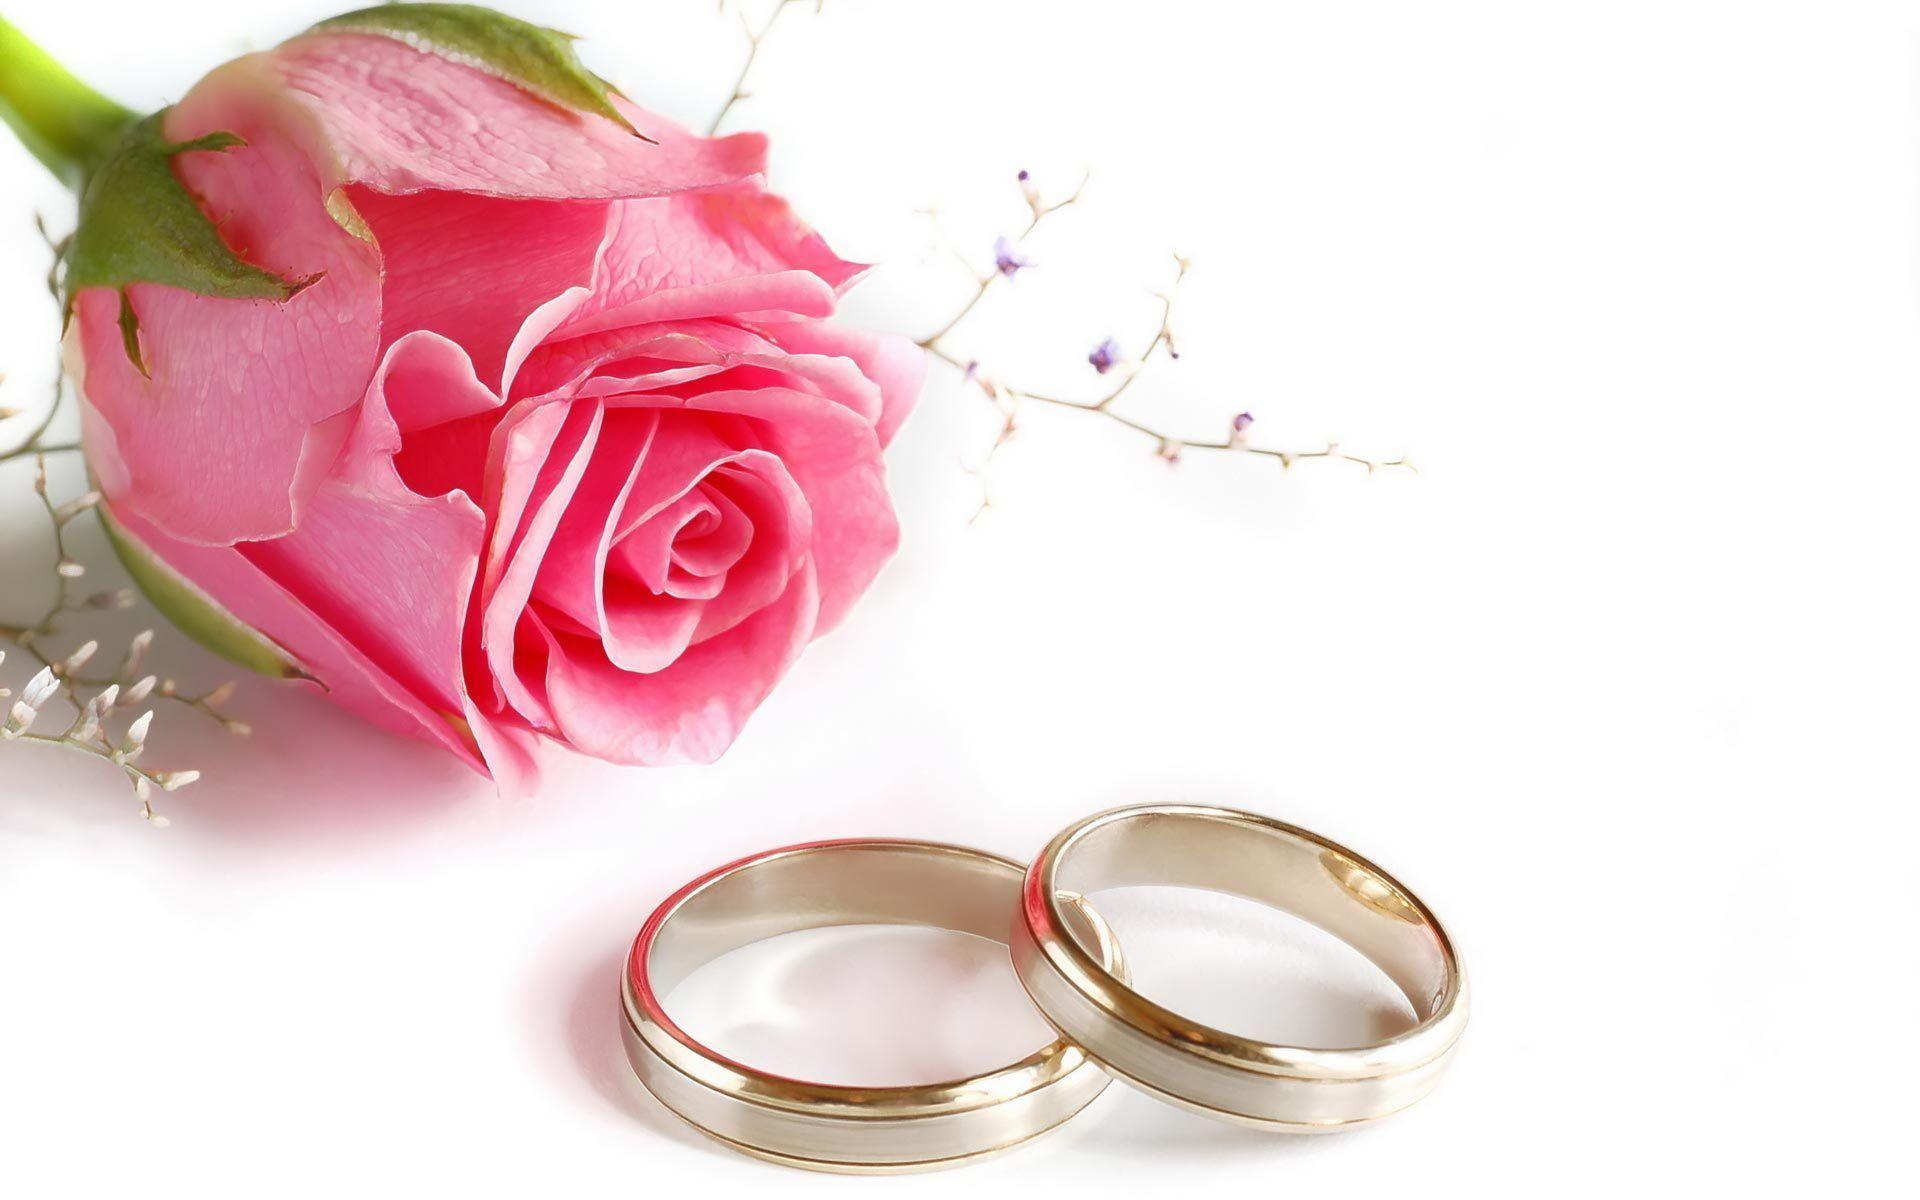 Wedding Rings And Flowers Wallpaper